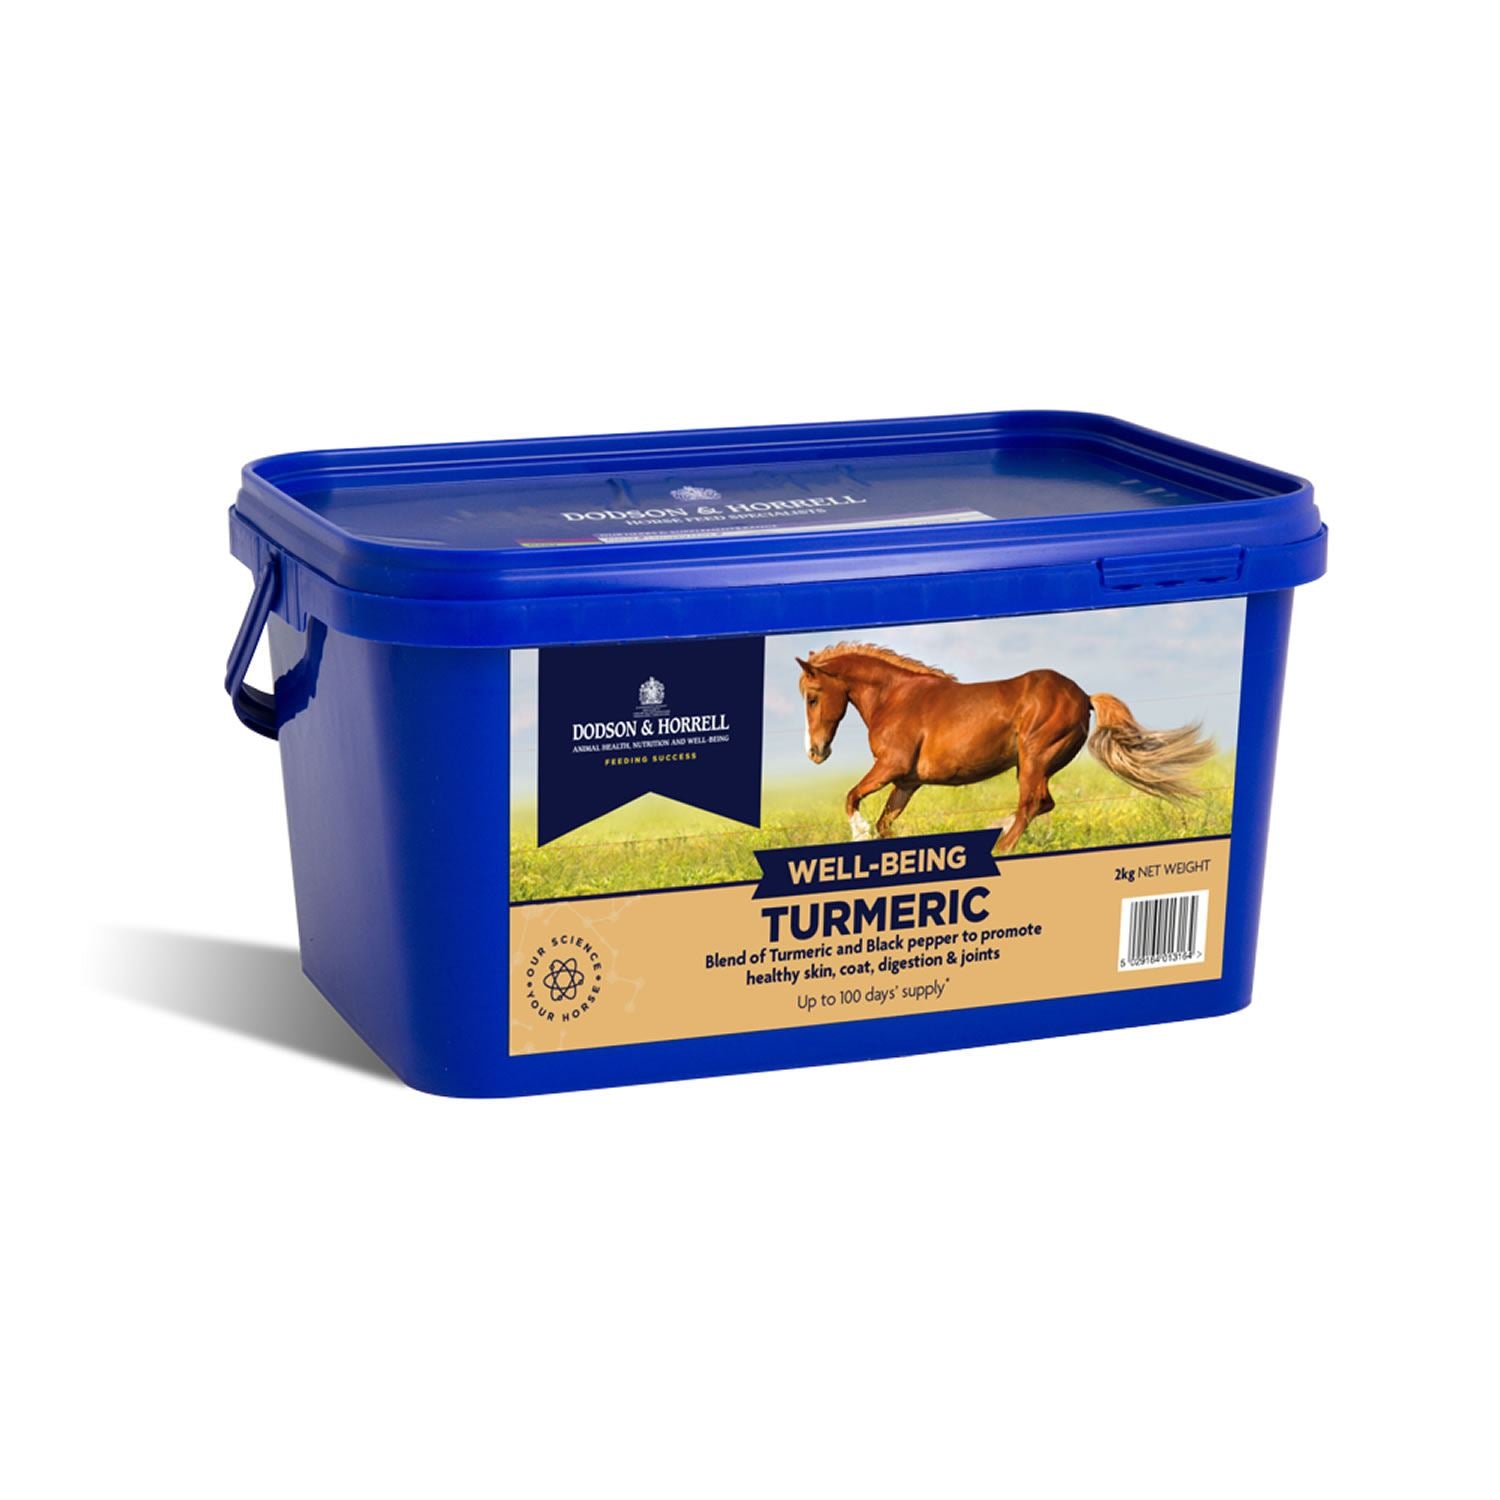 Dodson & Horrell Turmeric for enhanced equine skin, coat, digestion, and joints